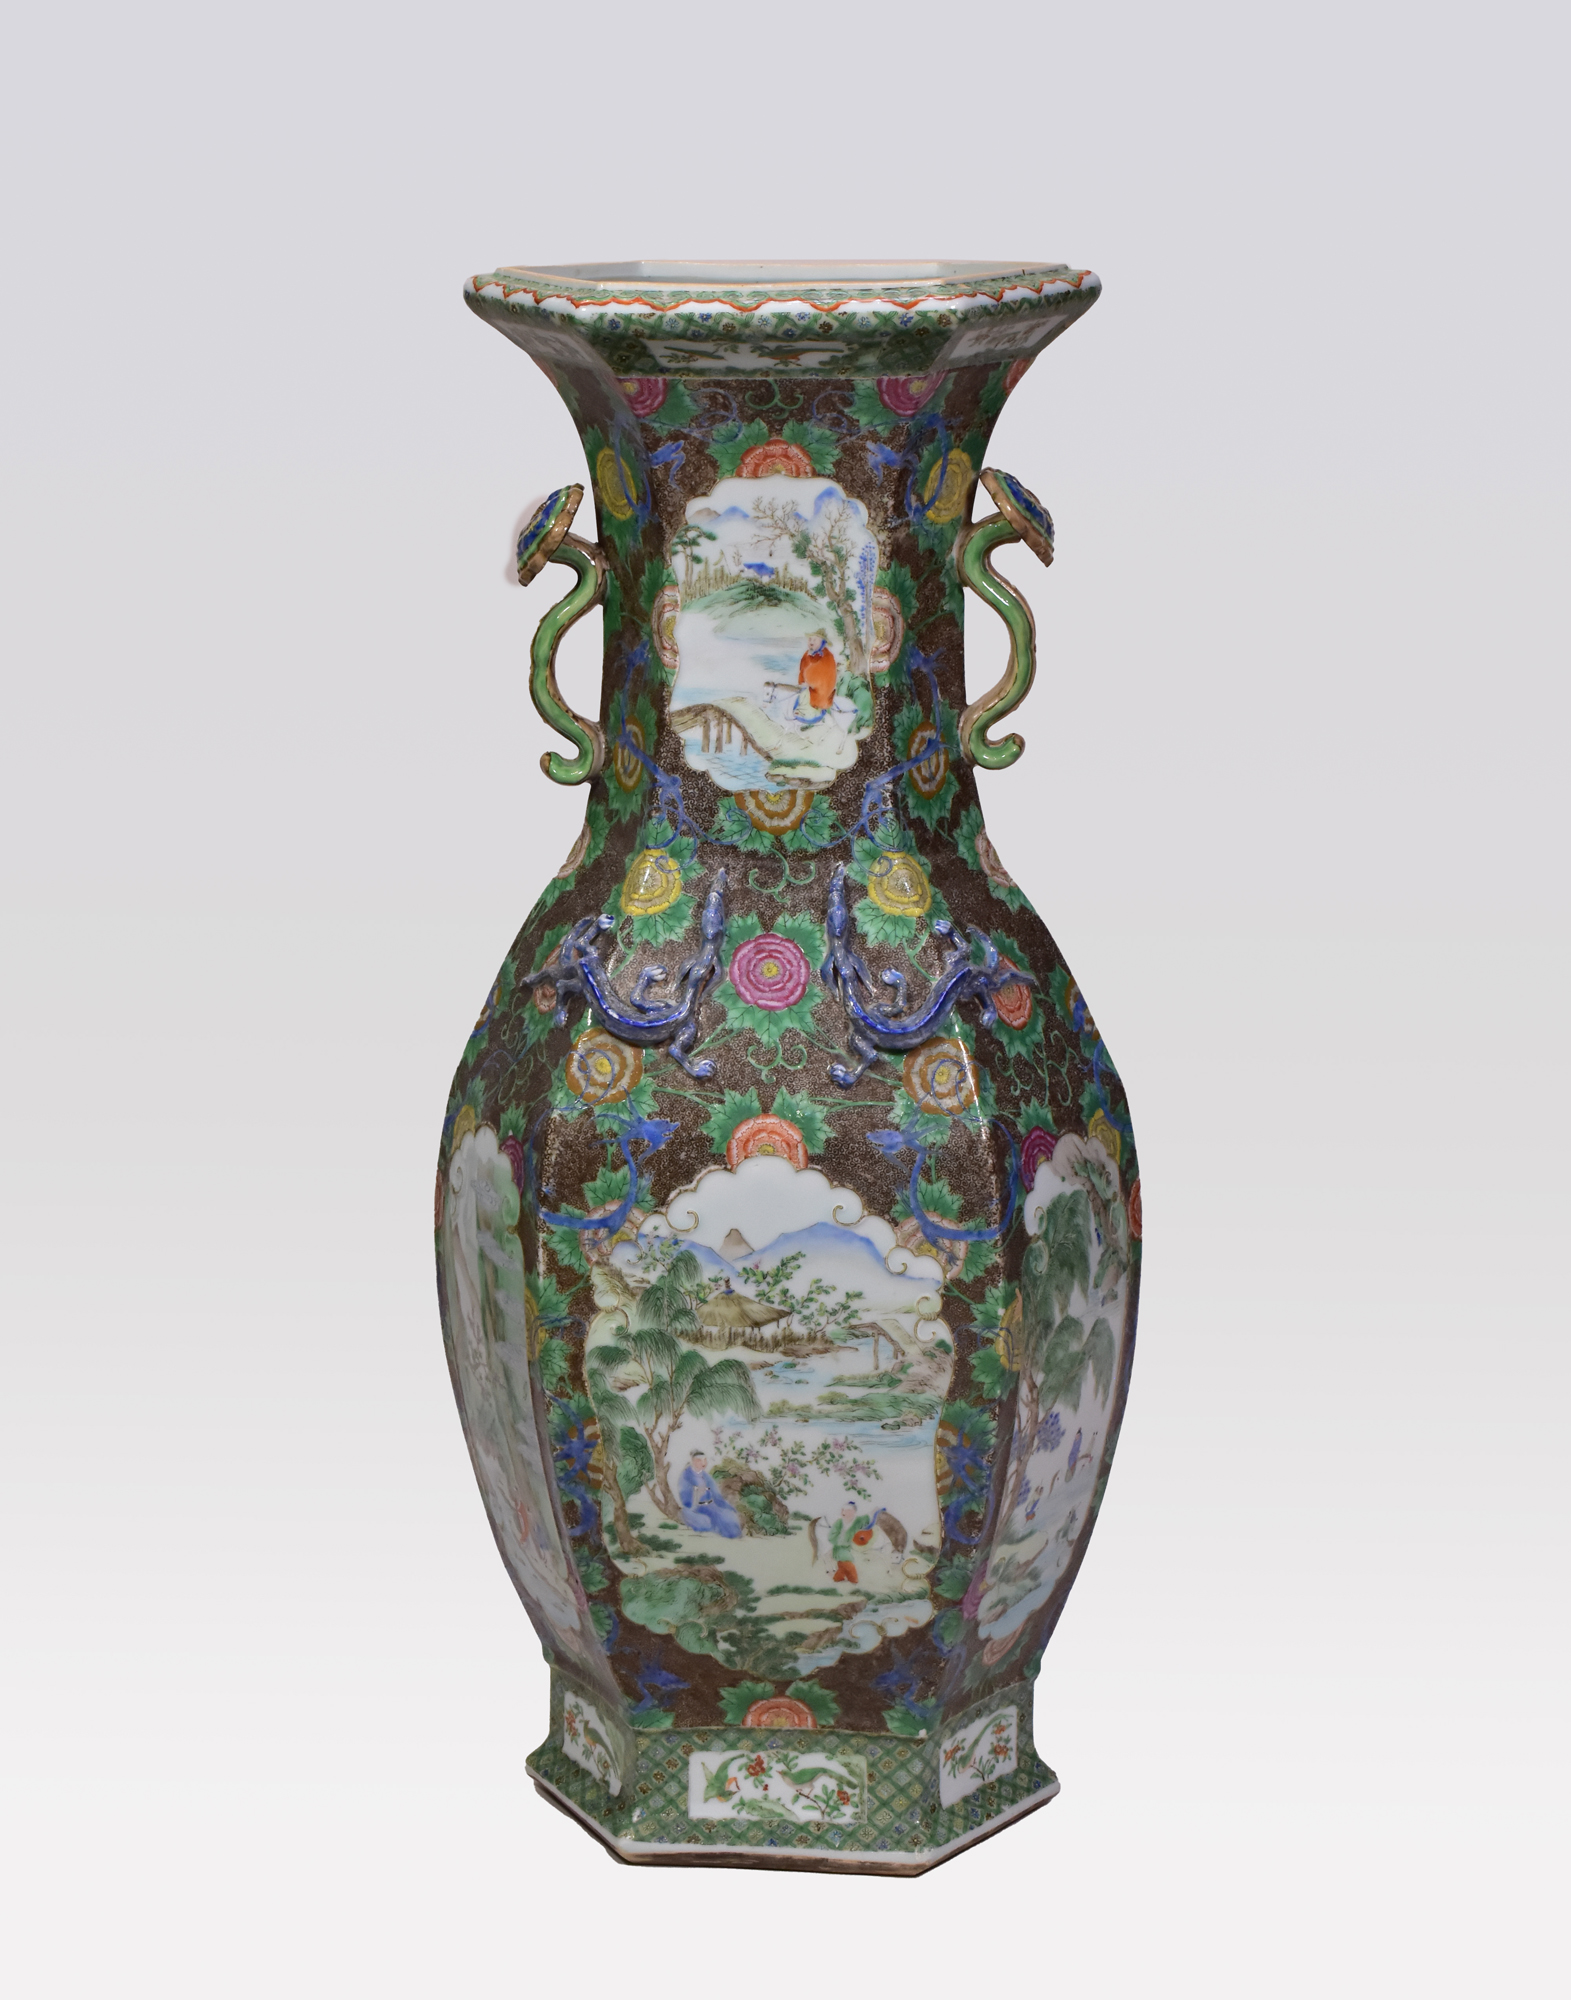 A LARGE CHINESE ‘FAMILLE-ROSE’ PORCELAIN HEXAGONAL VASE, QING DYNASTY, 19TH CENTURY